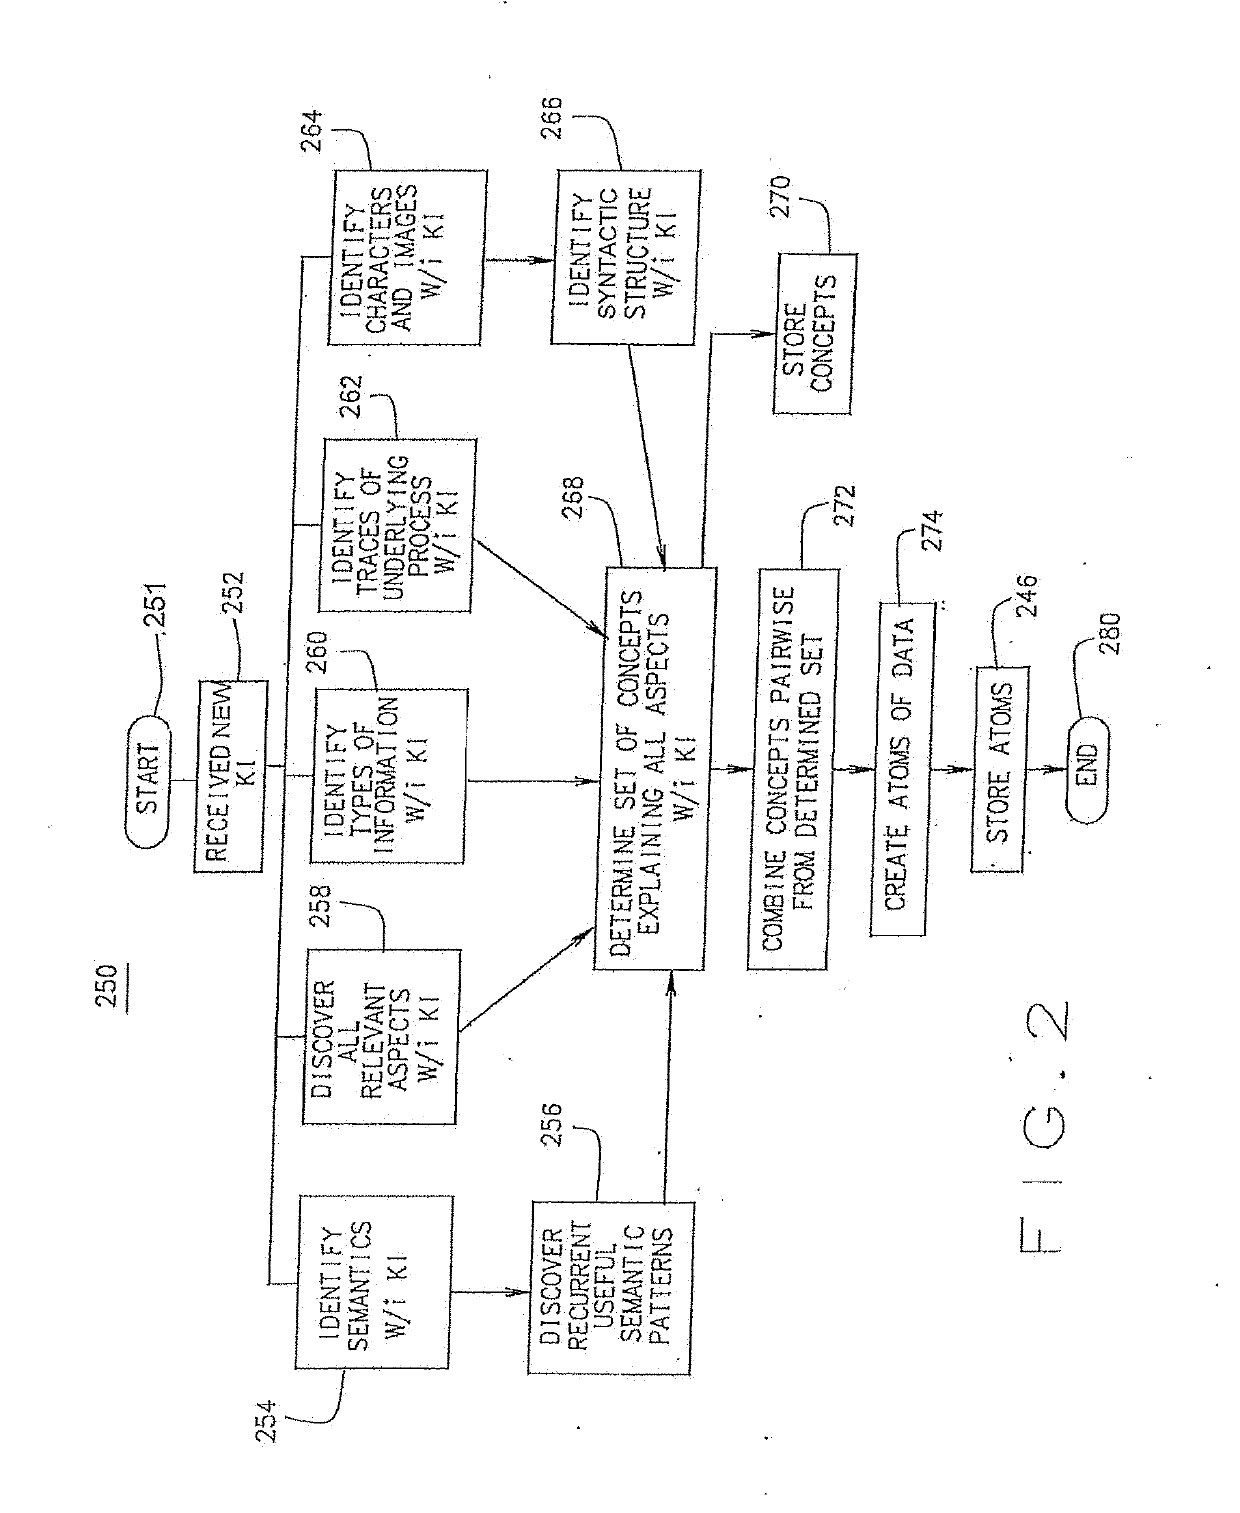 Systems and Methods for a Universal Task Independent Simulation and Control Platform for Generating Controlled Actions Using Nuanced Artificial Intelligence